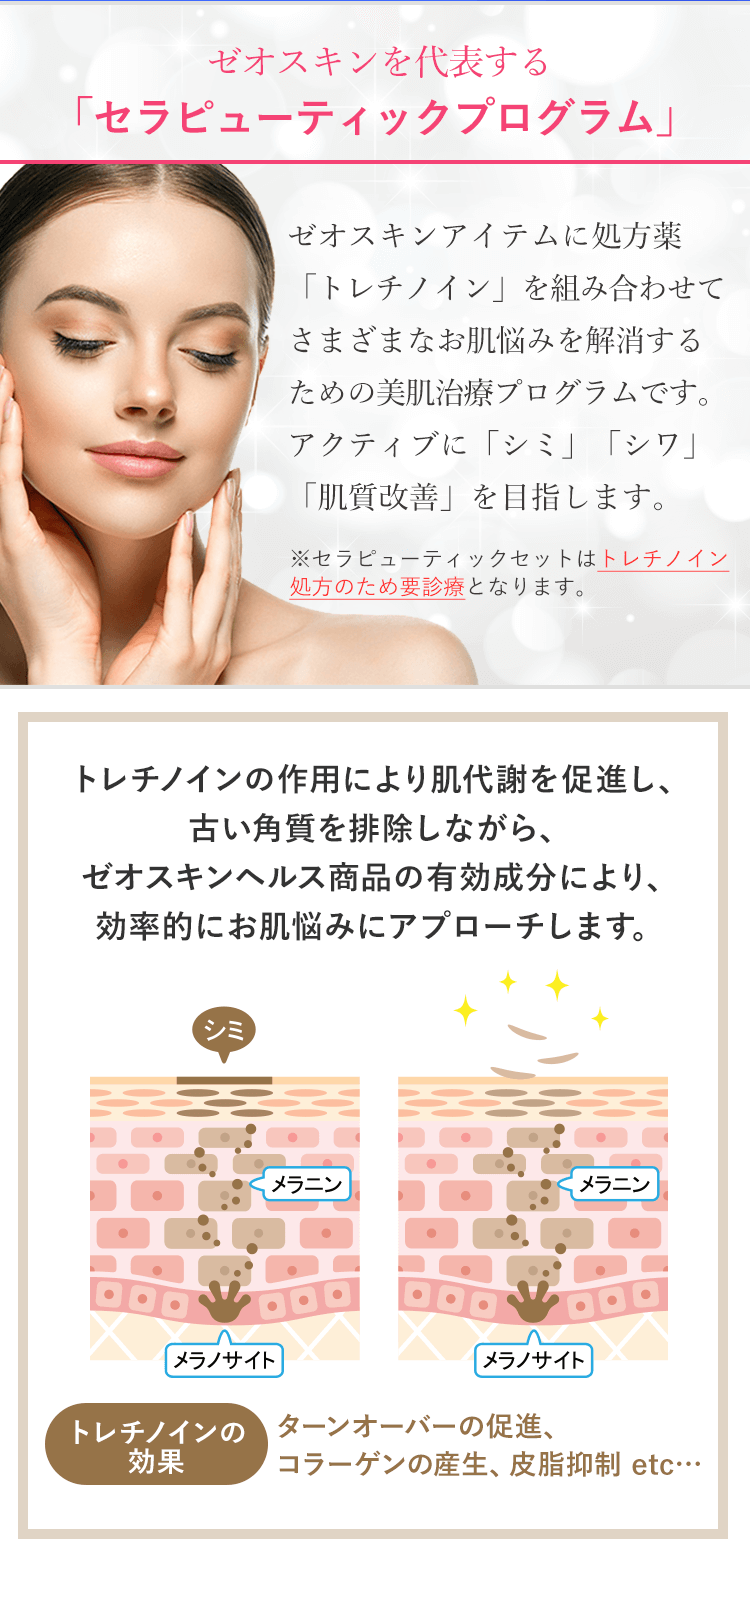 CLINIC FOR BEAUTY ゼオスキン最大51%OFFキャンペーン